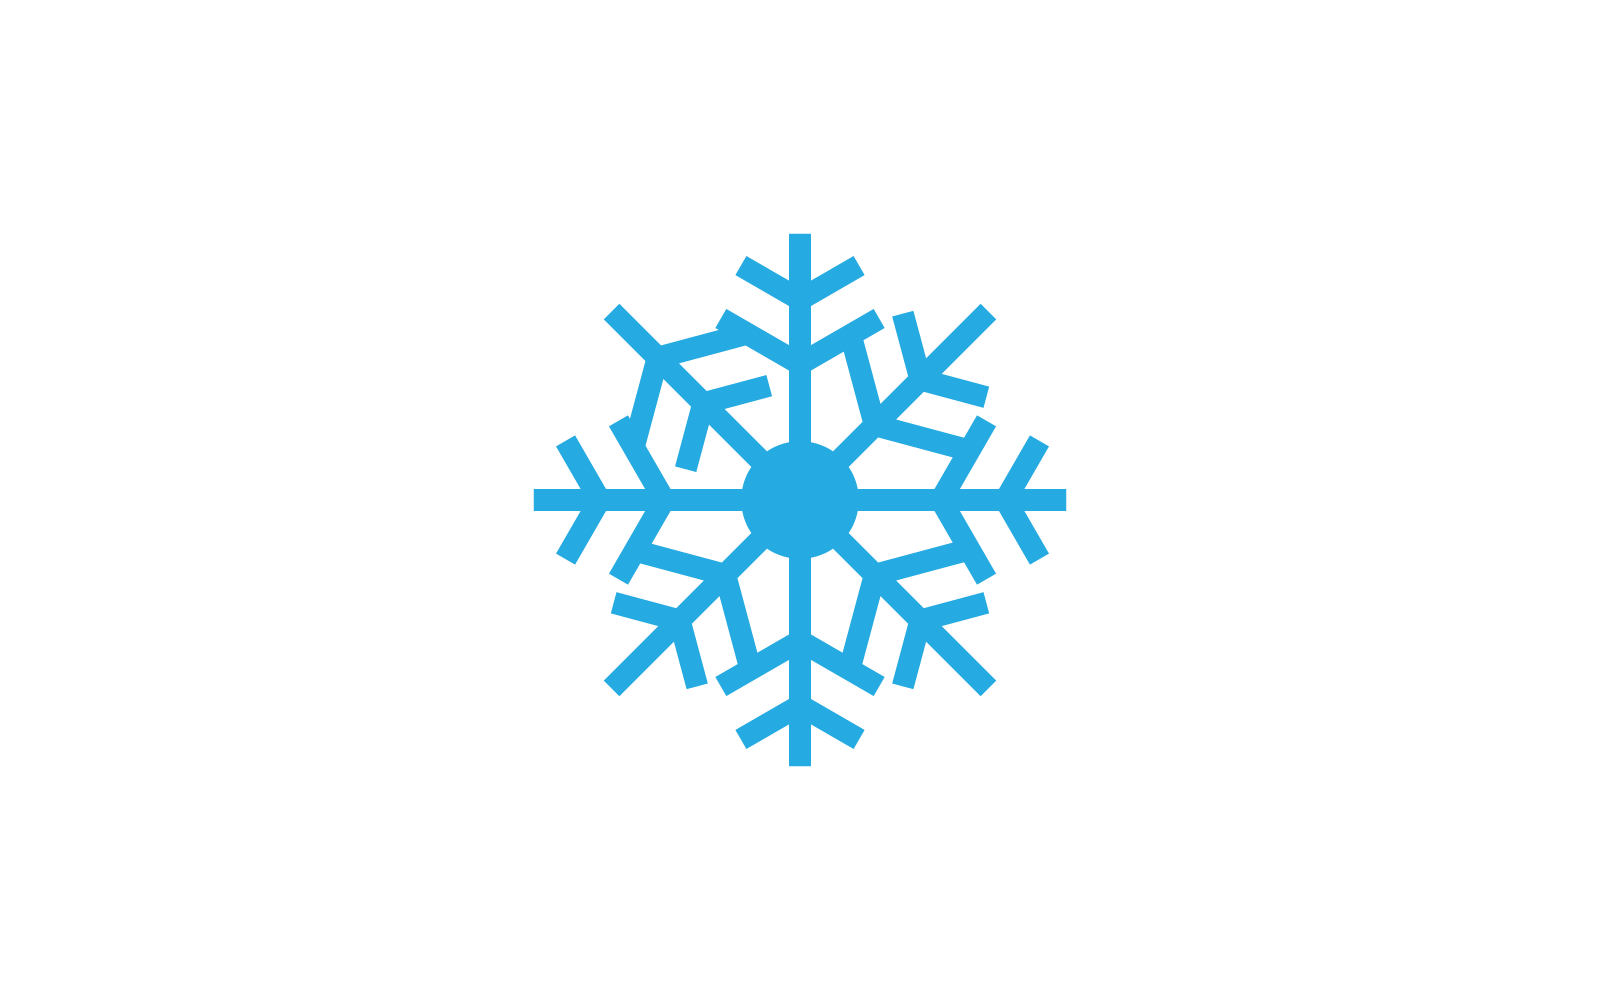 Snowflakes icon and symbol ilustration vector